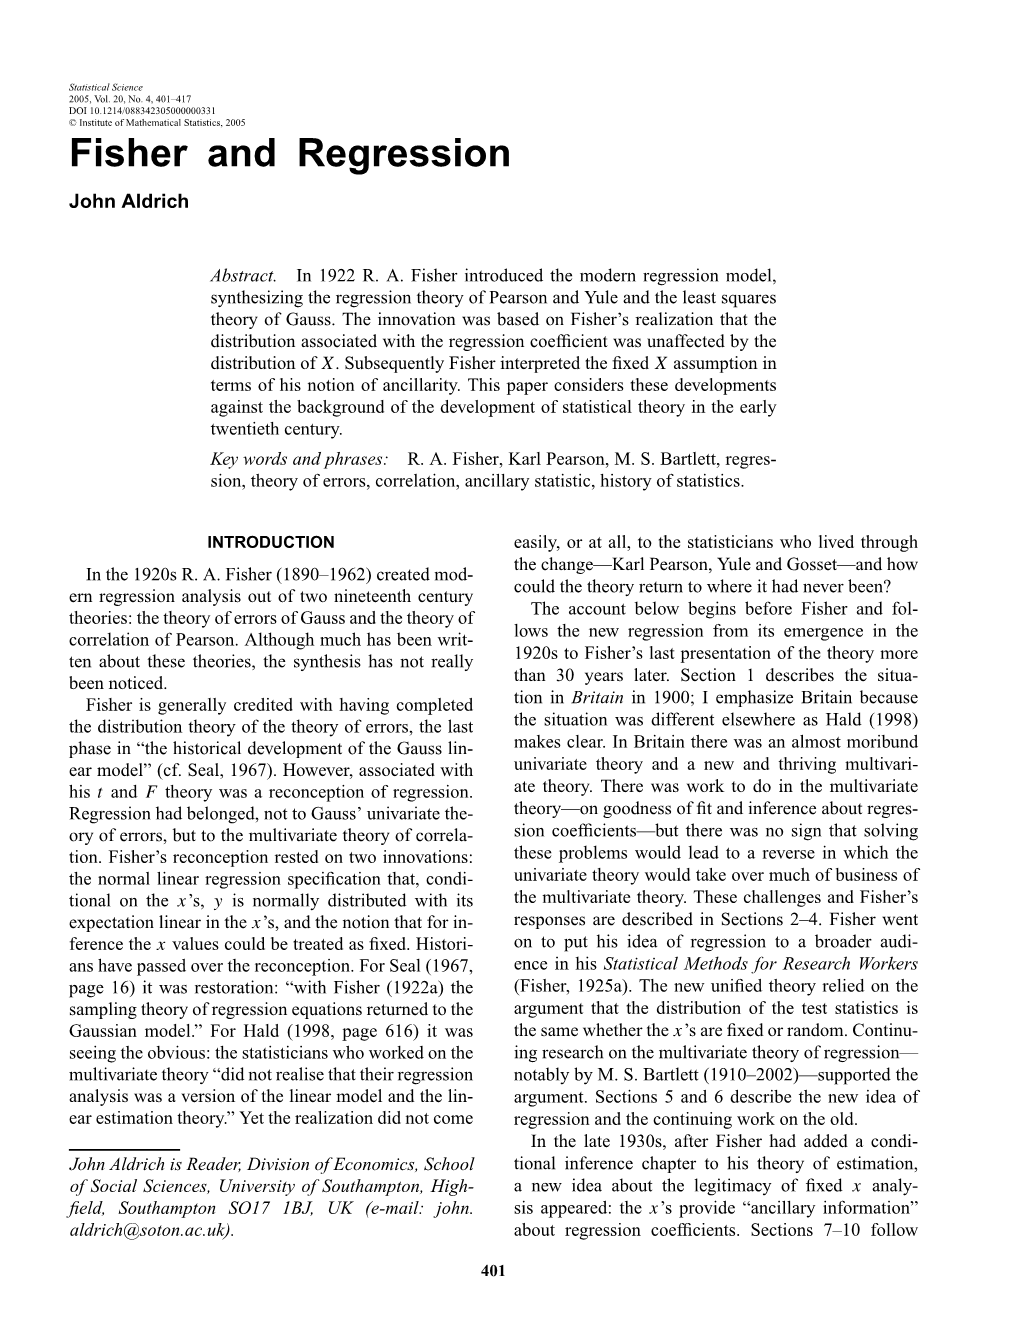 Fisher and Regression.Pdf